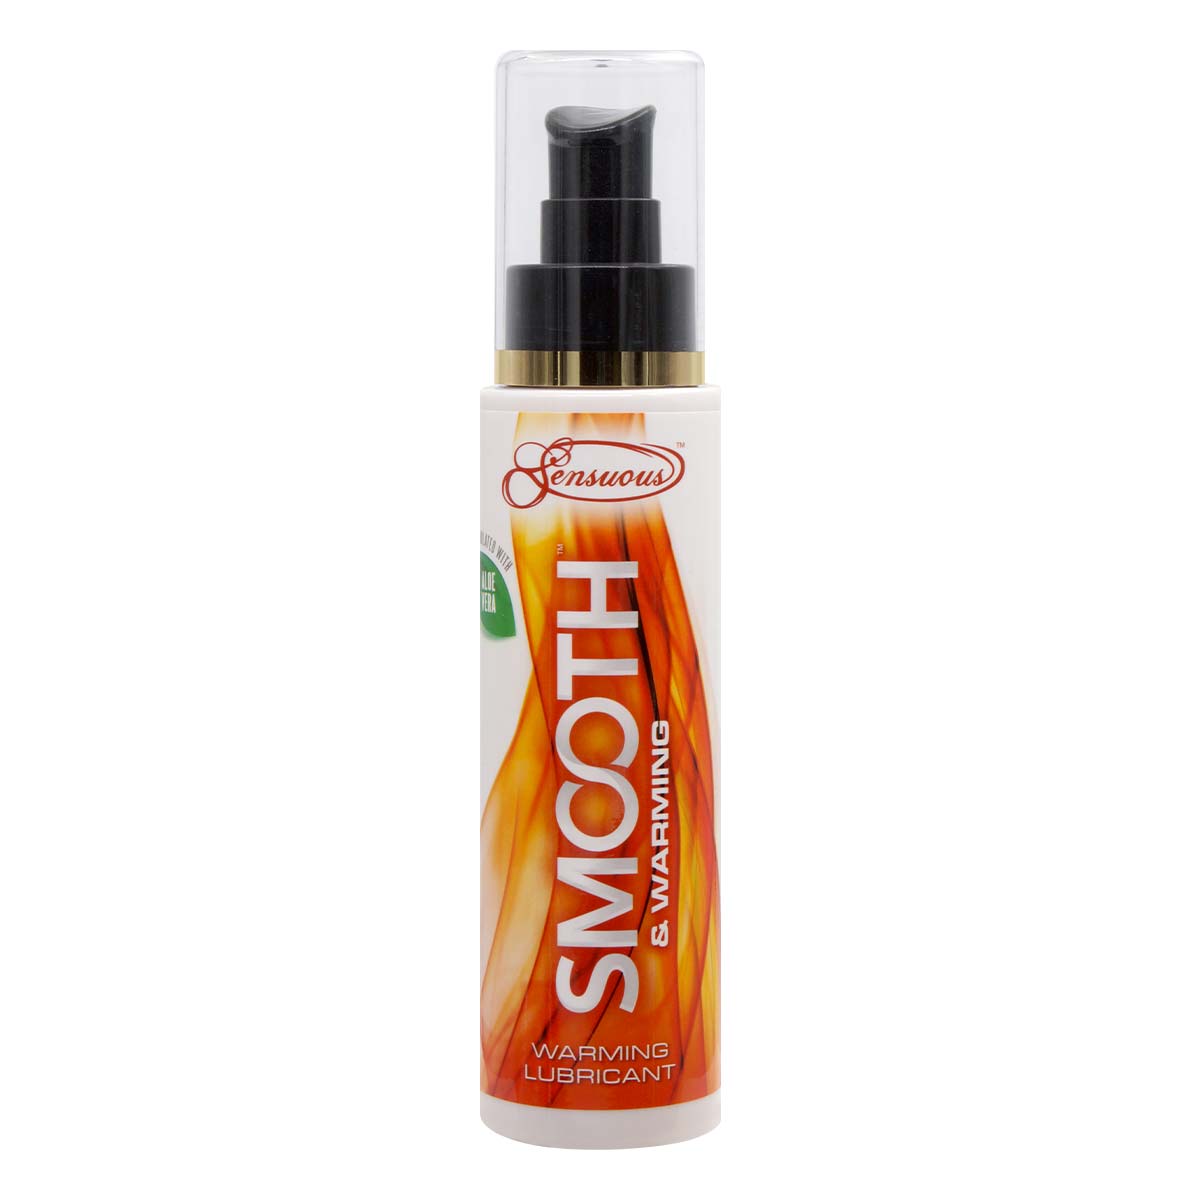 Sensuous Smooth & Warming 100ml Water-based Lubricant -p_2